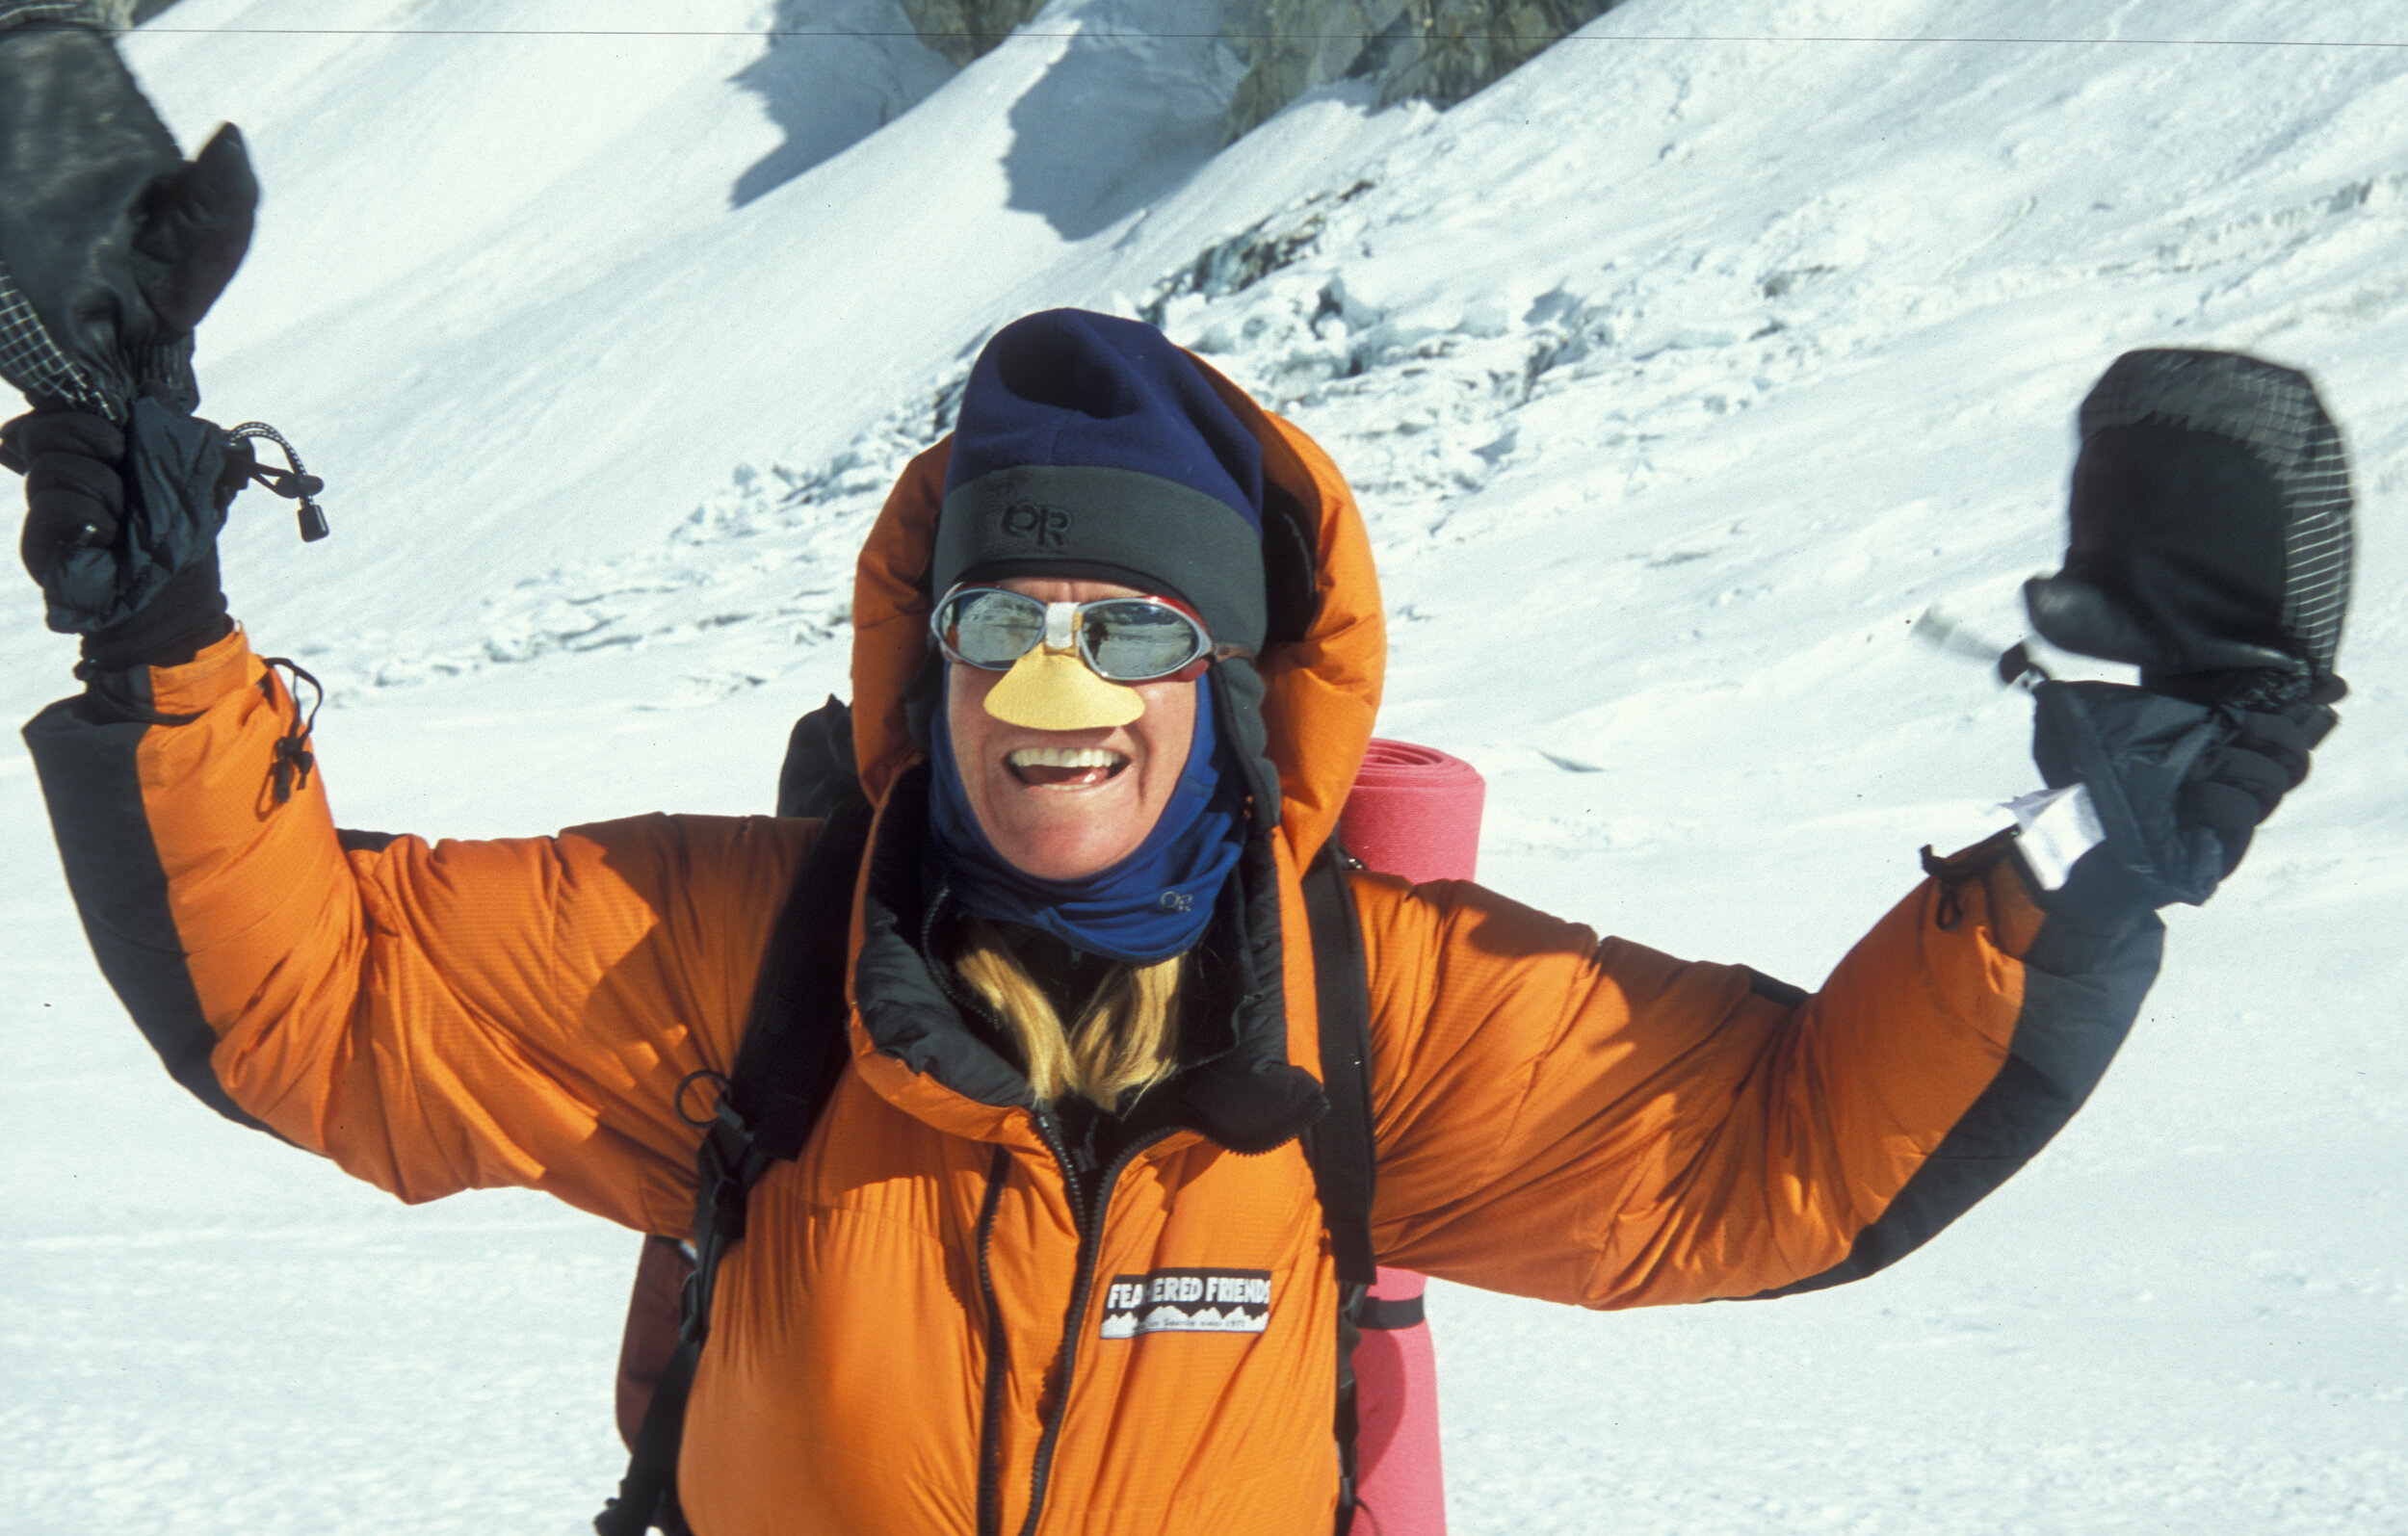  Maegan Carney with mountaineers nose protection, Everest Camp II, October 2003. Photo Wally Berg 